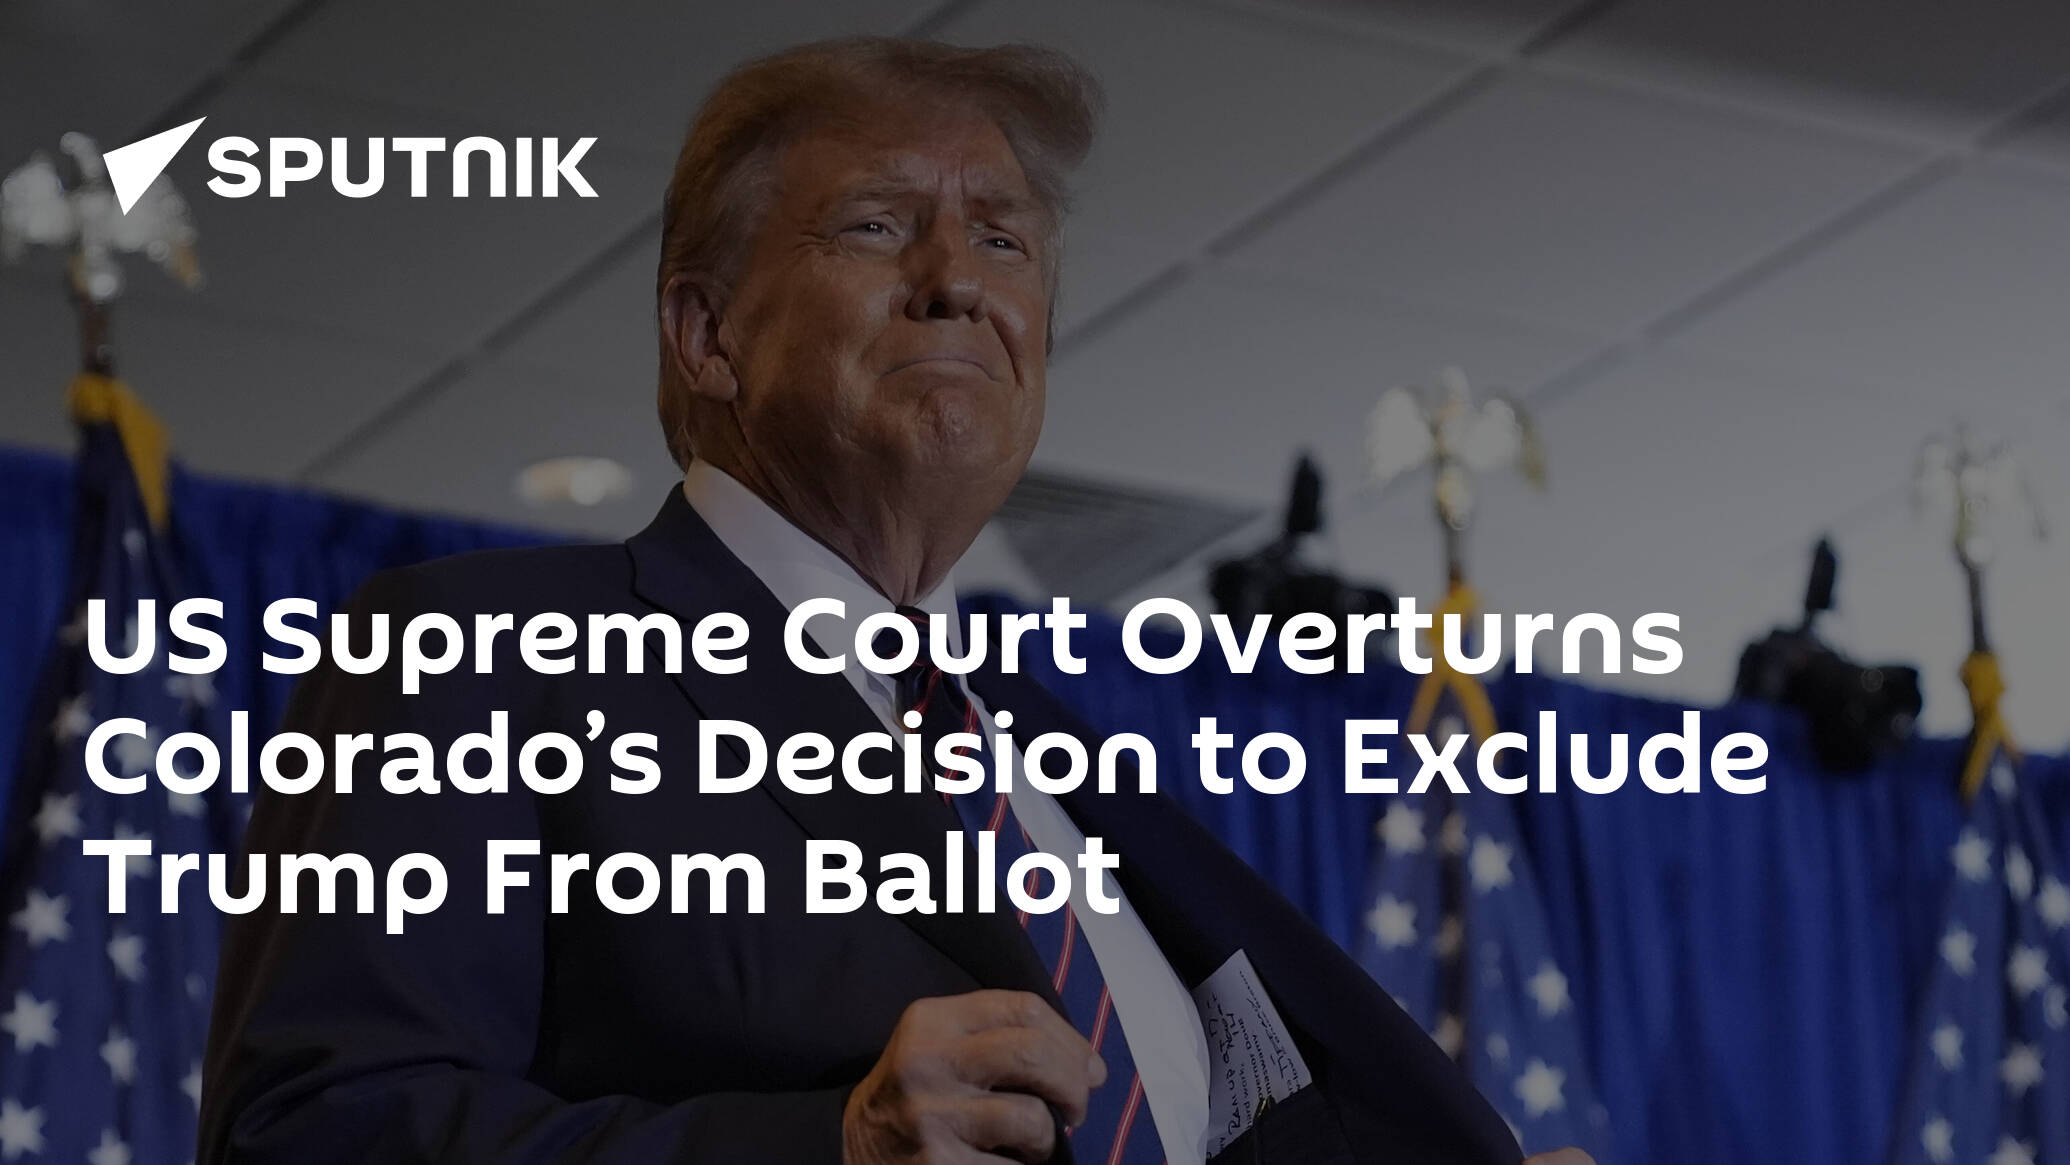 US Supreme Court Overturns Colorado’s Decision to Exclude Trump From Ballot